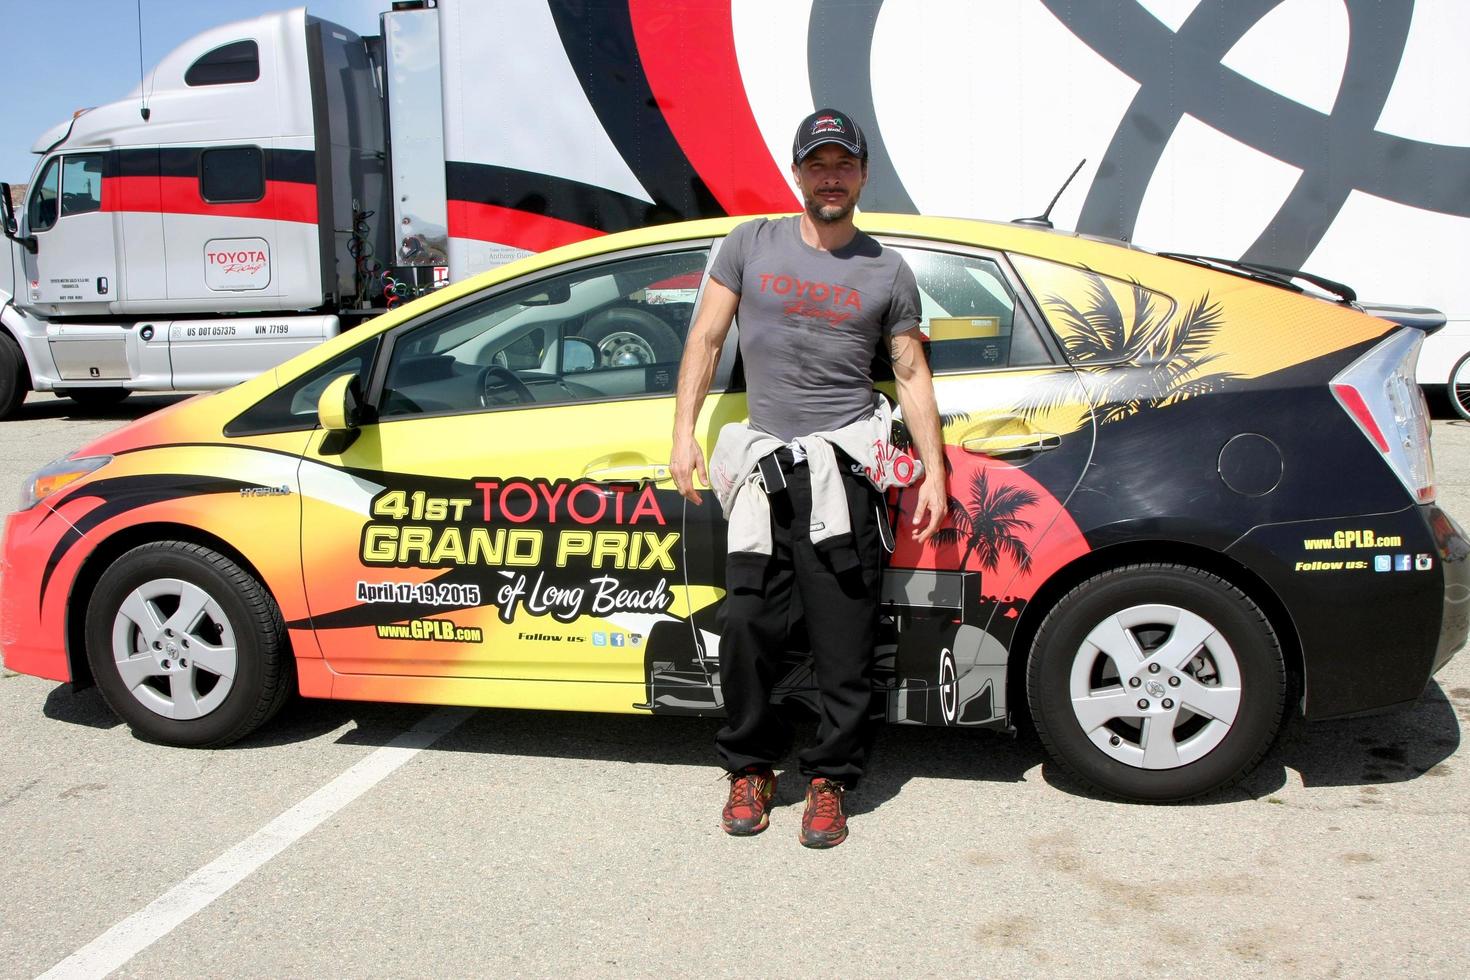 LOS ANGELES, FEB 21 -  Raul Mendez at the Grand Prix of Long Beach Pro Celebrity Race Training at the Willow Springs International Raceway on March 21, 2015 in Rosamond, CA photo